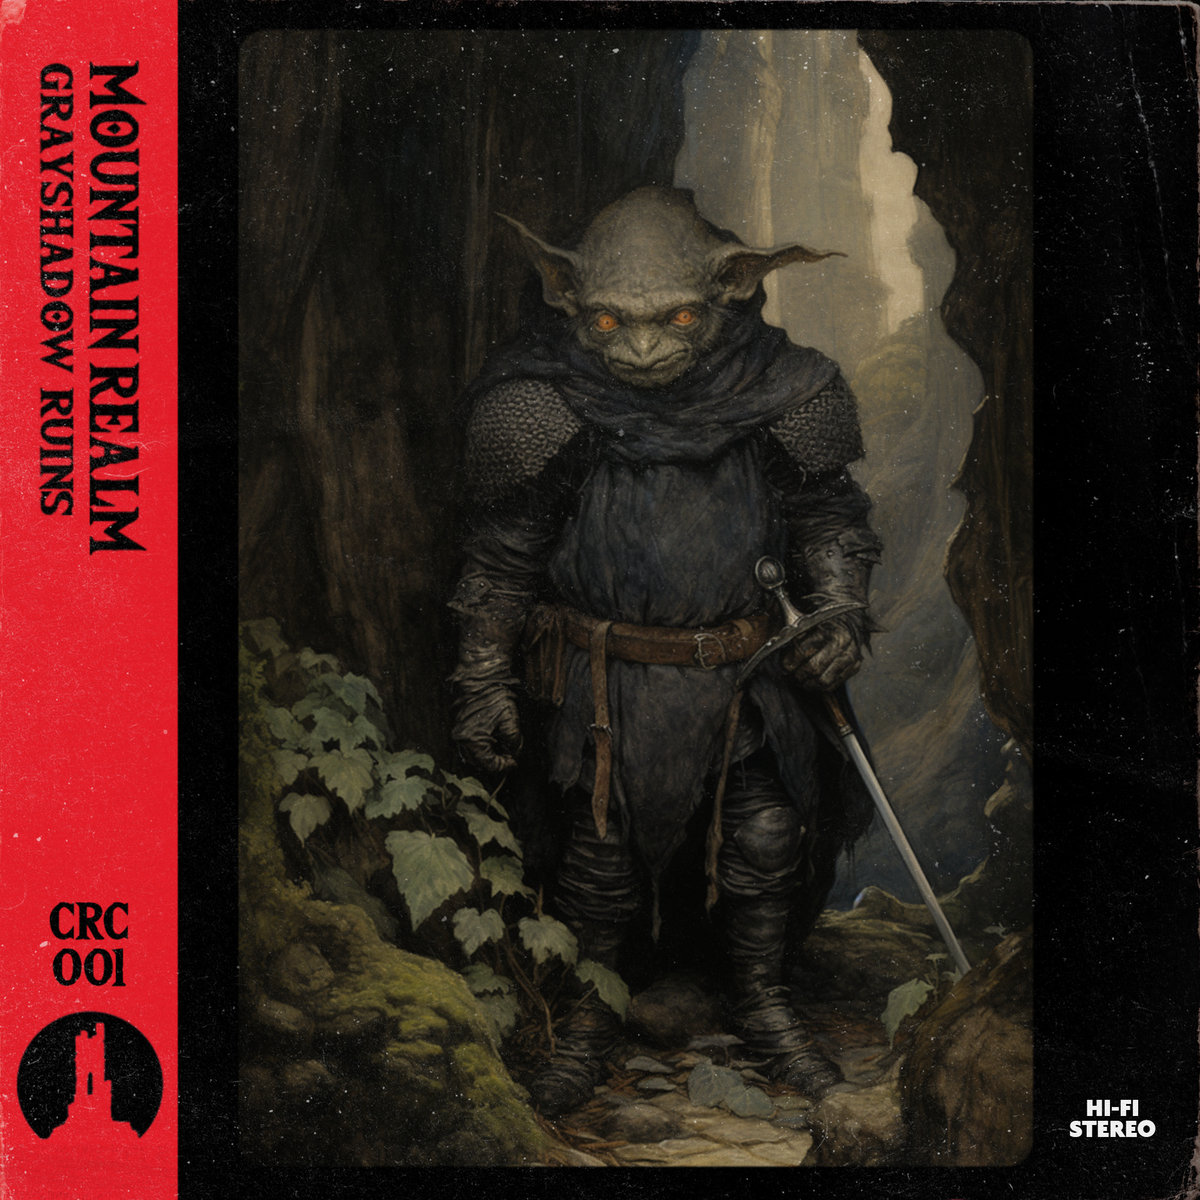 Get out your dice bag and prepare for an adventure as Cryo Chamber has launched their sister label Cryo Crypt focusing on dungeon synth / CRPG music. Read the full story below. brutalresonance.com/news/cryo-cham… @CryoChamber